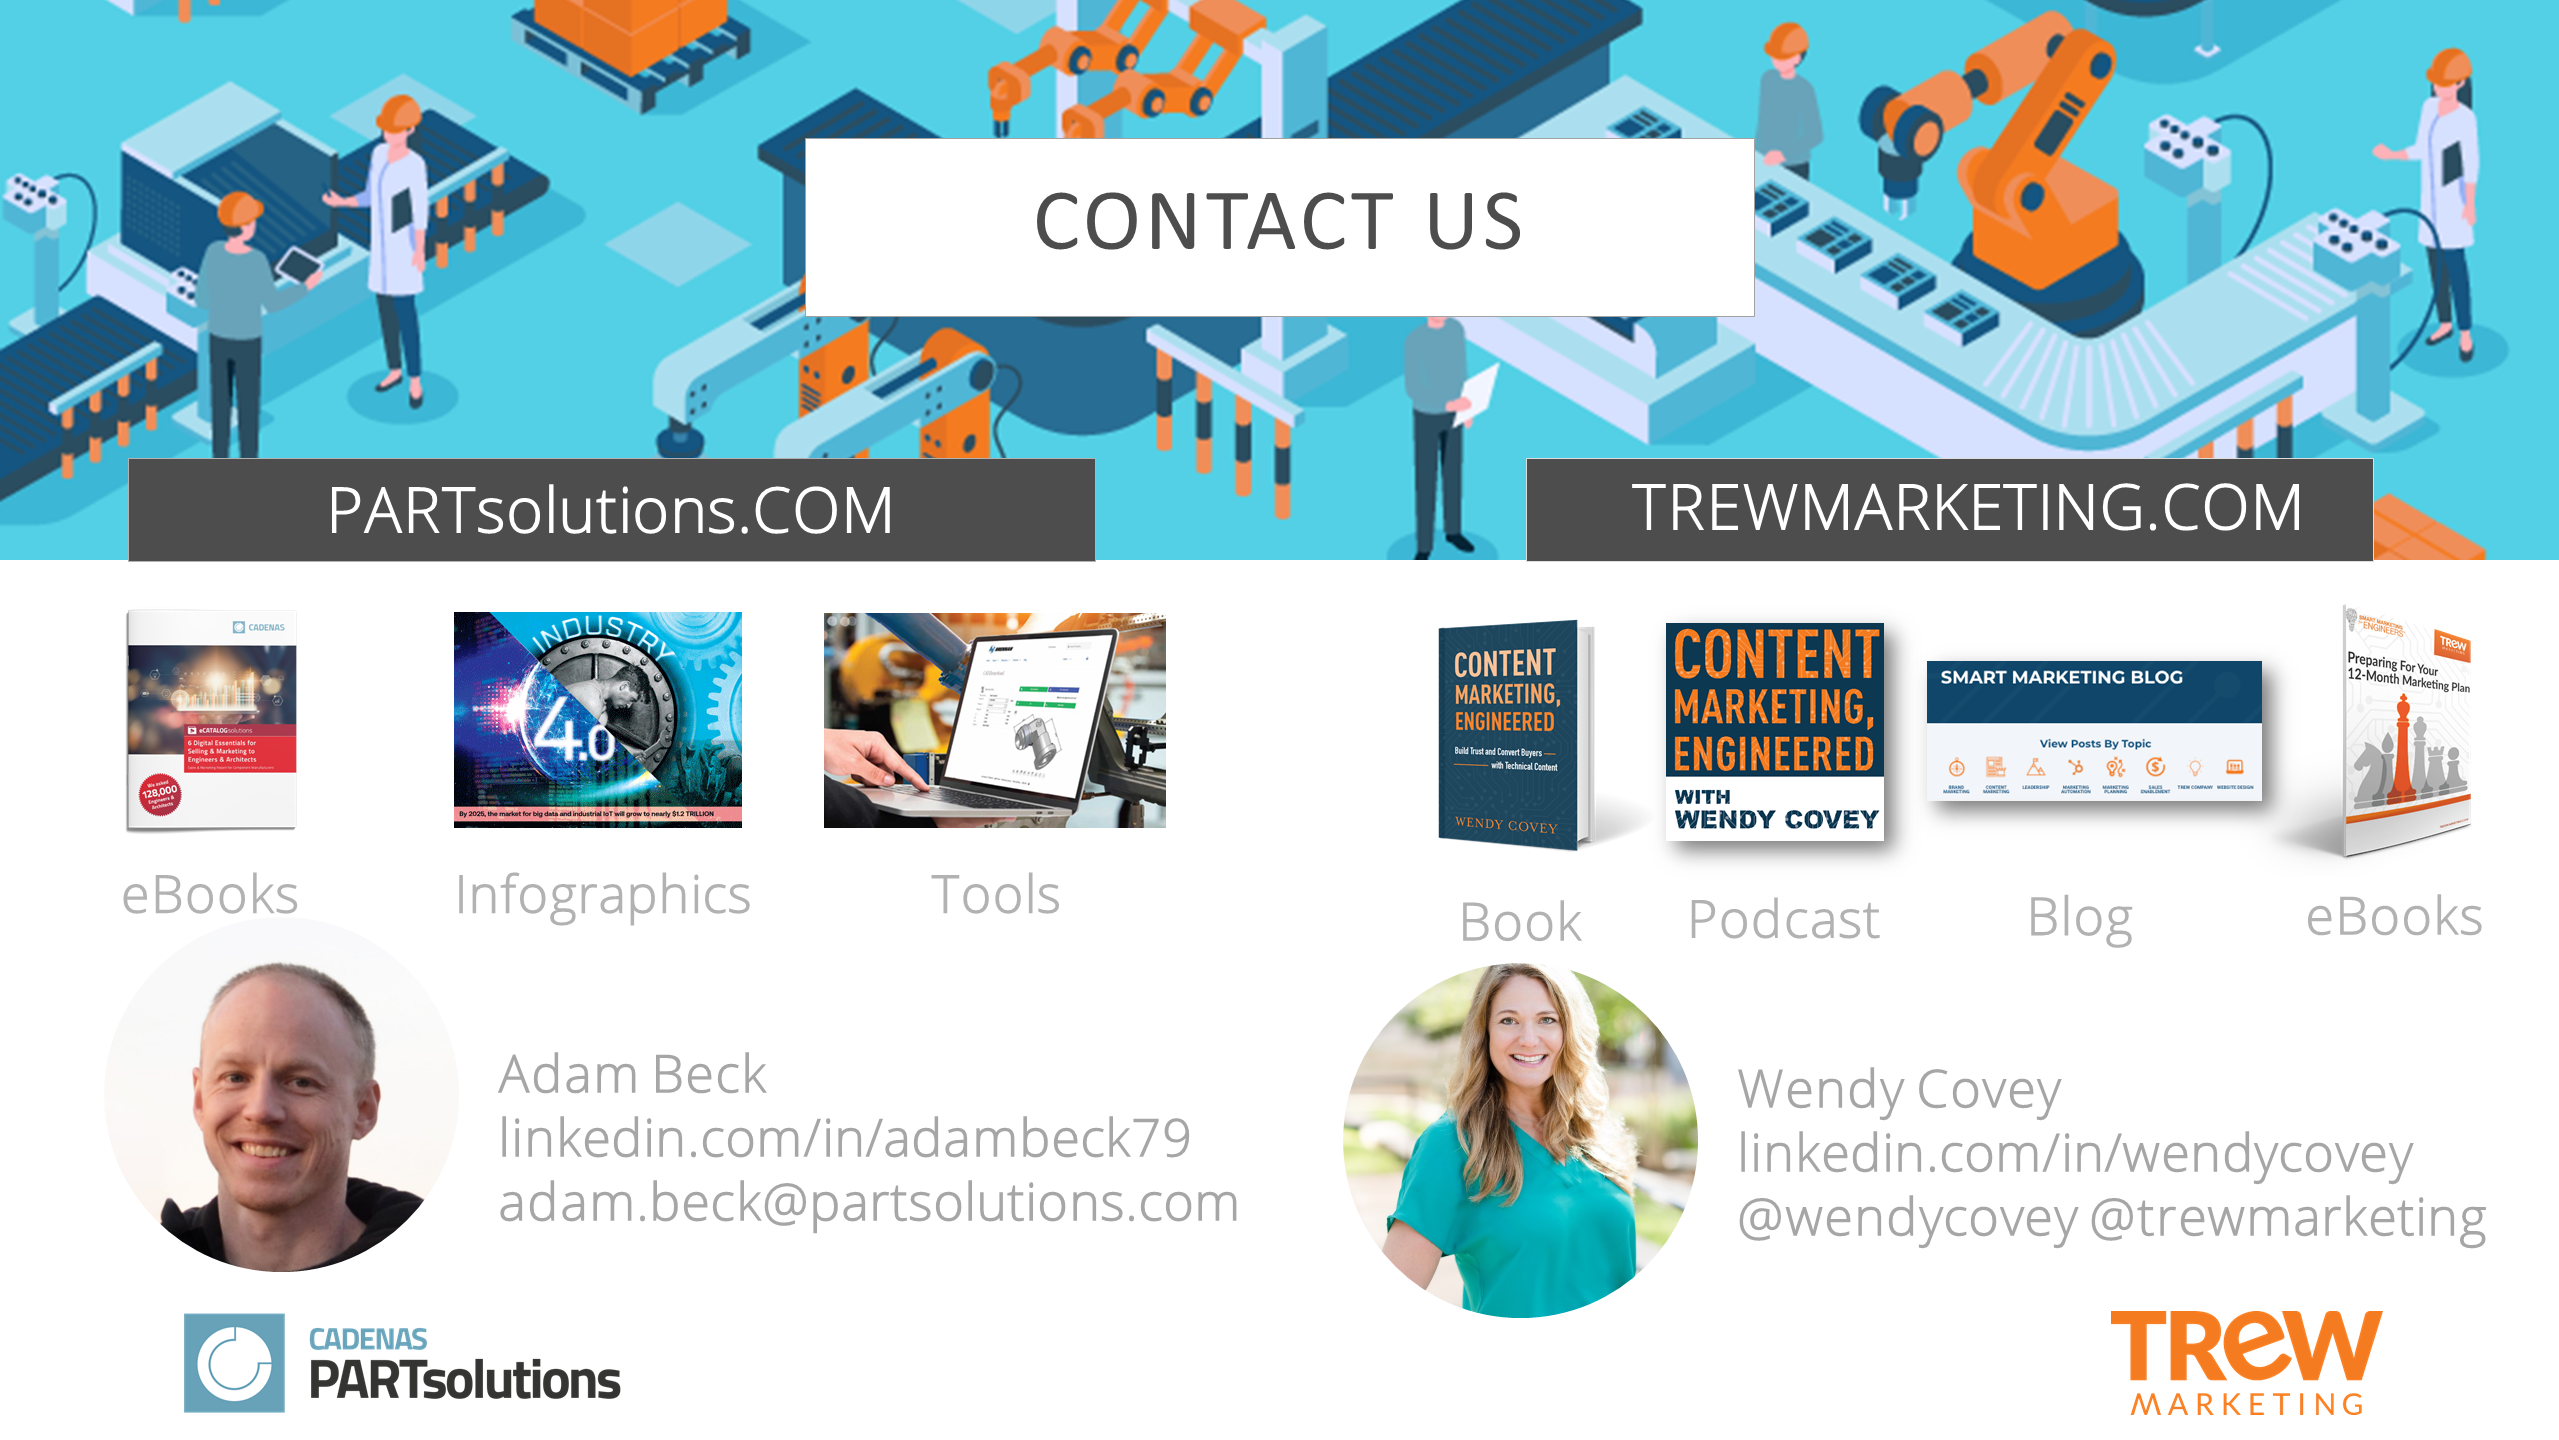 Industrial Marketing Content: Contact Adam Beck or Wendy Covey